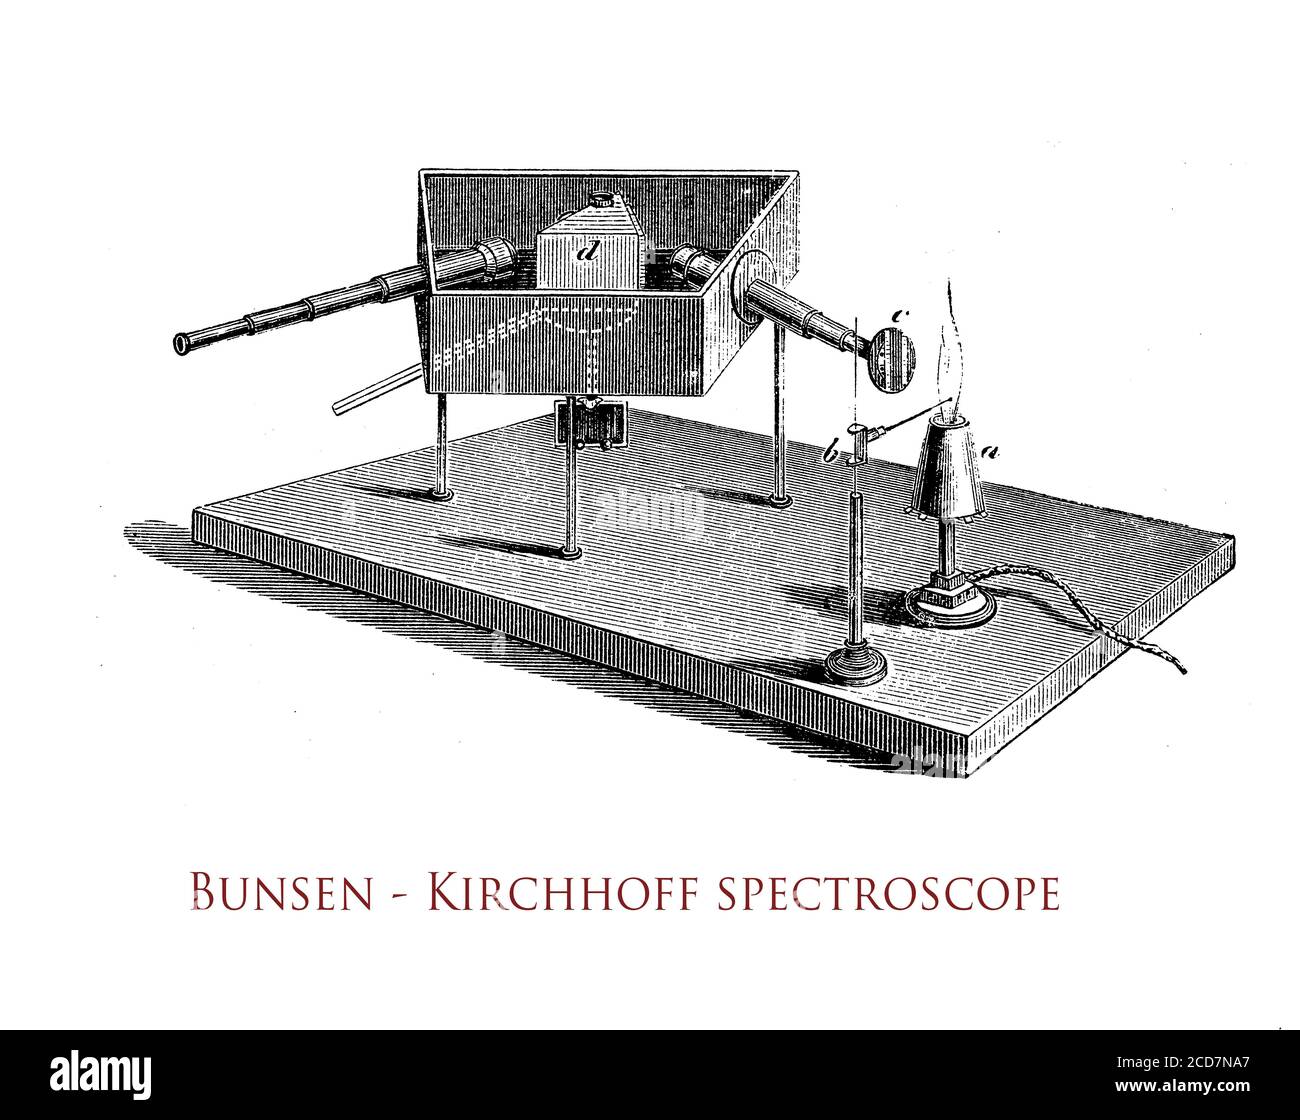 The spectroscope developed in 19th century by Bunsen and Kirchhoff provides a high quality optical system and an easy-to-read scale, allowing to measure discrete atomic spectral lines Stock Photo